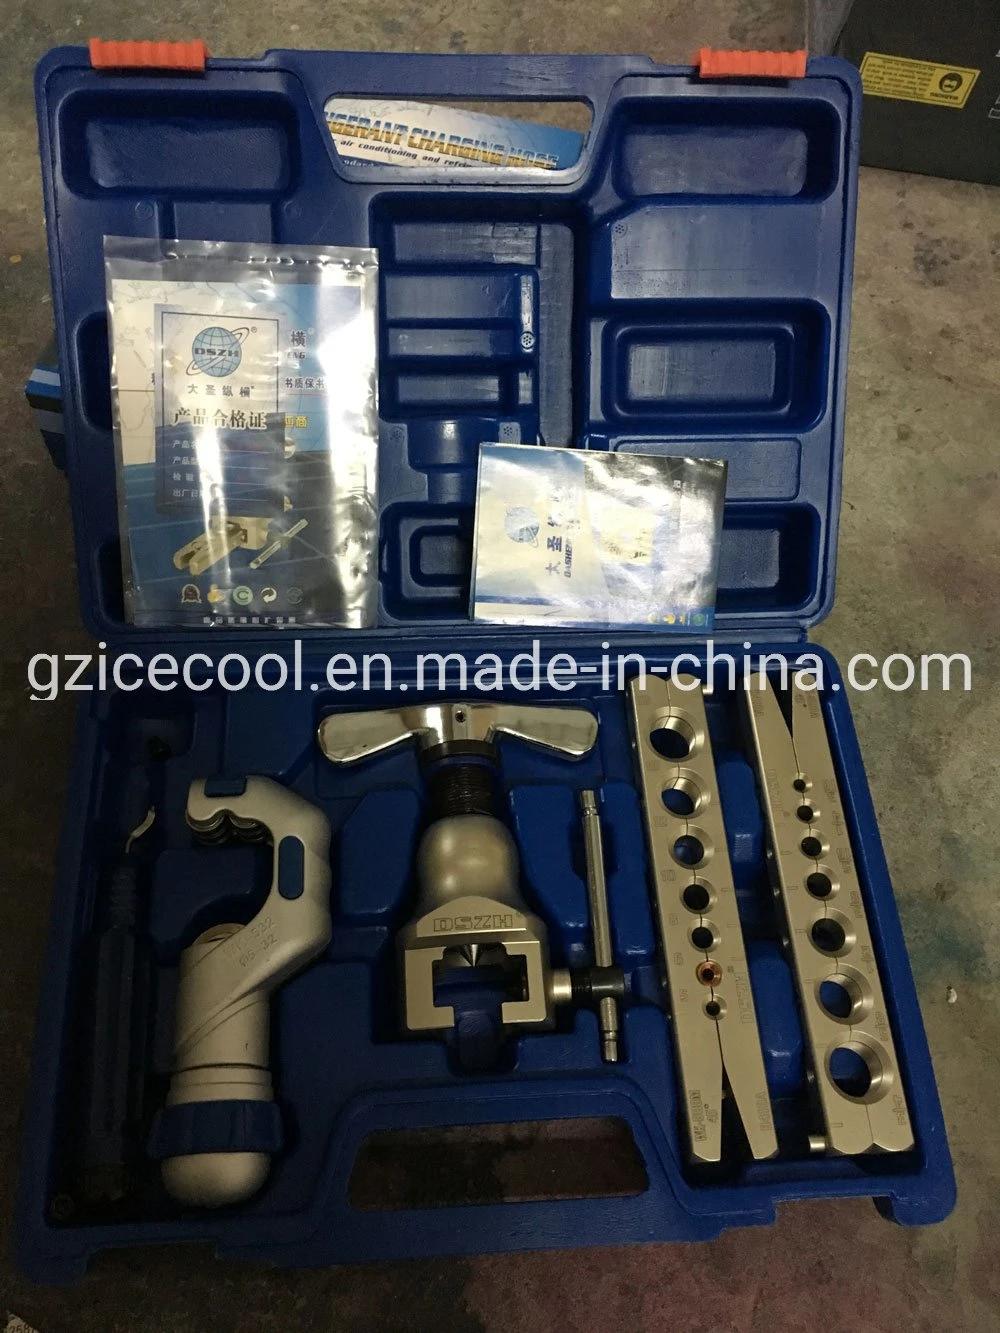 Wk-808FT-L 45 Degree Dszh Eccentric Cone Type Flaring Tools for 3/16 to 3/4 (5mm-19mm)